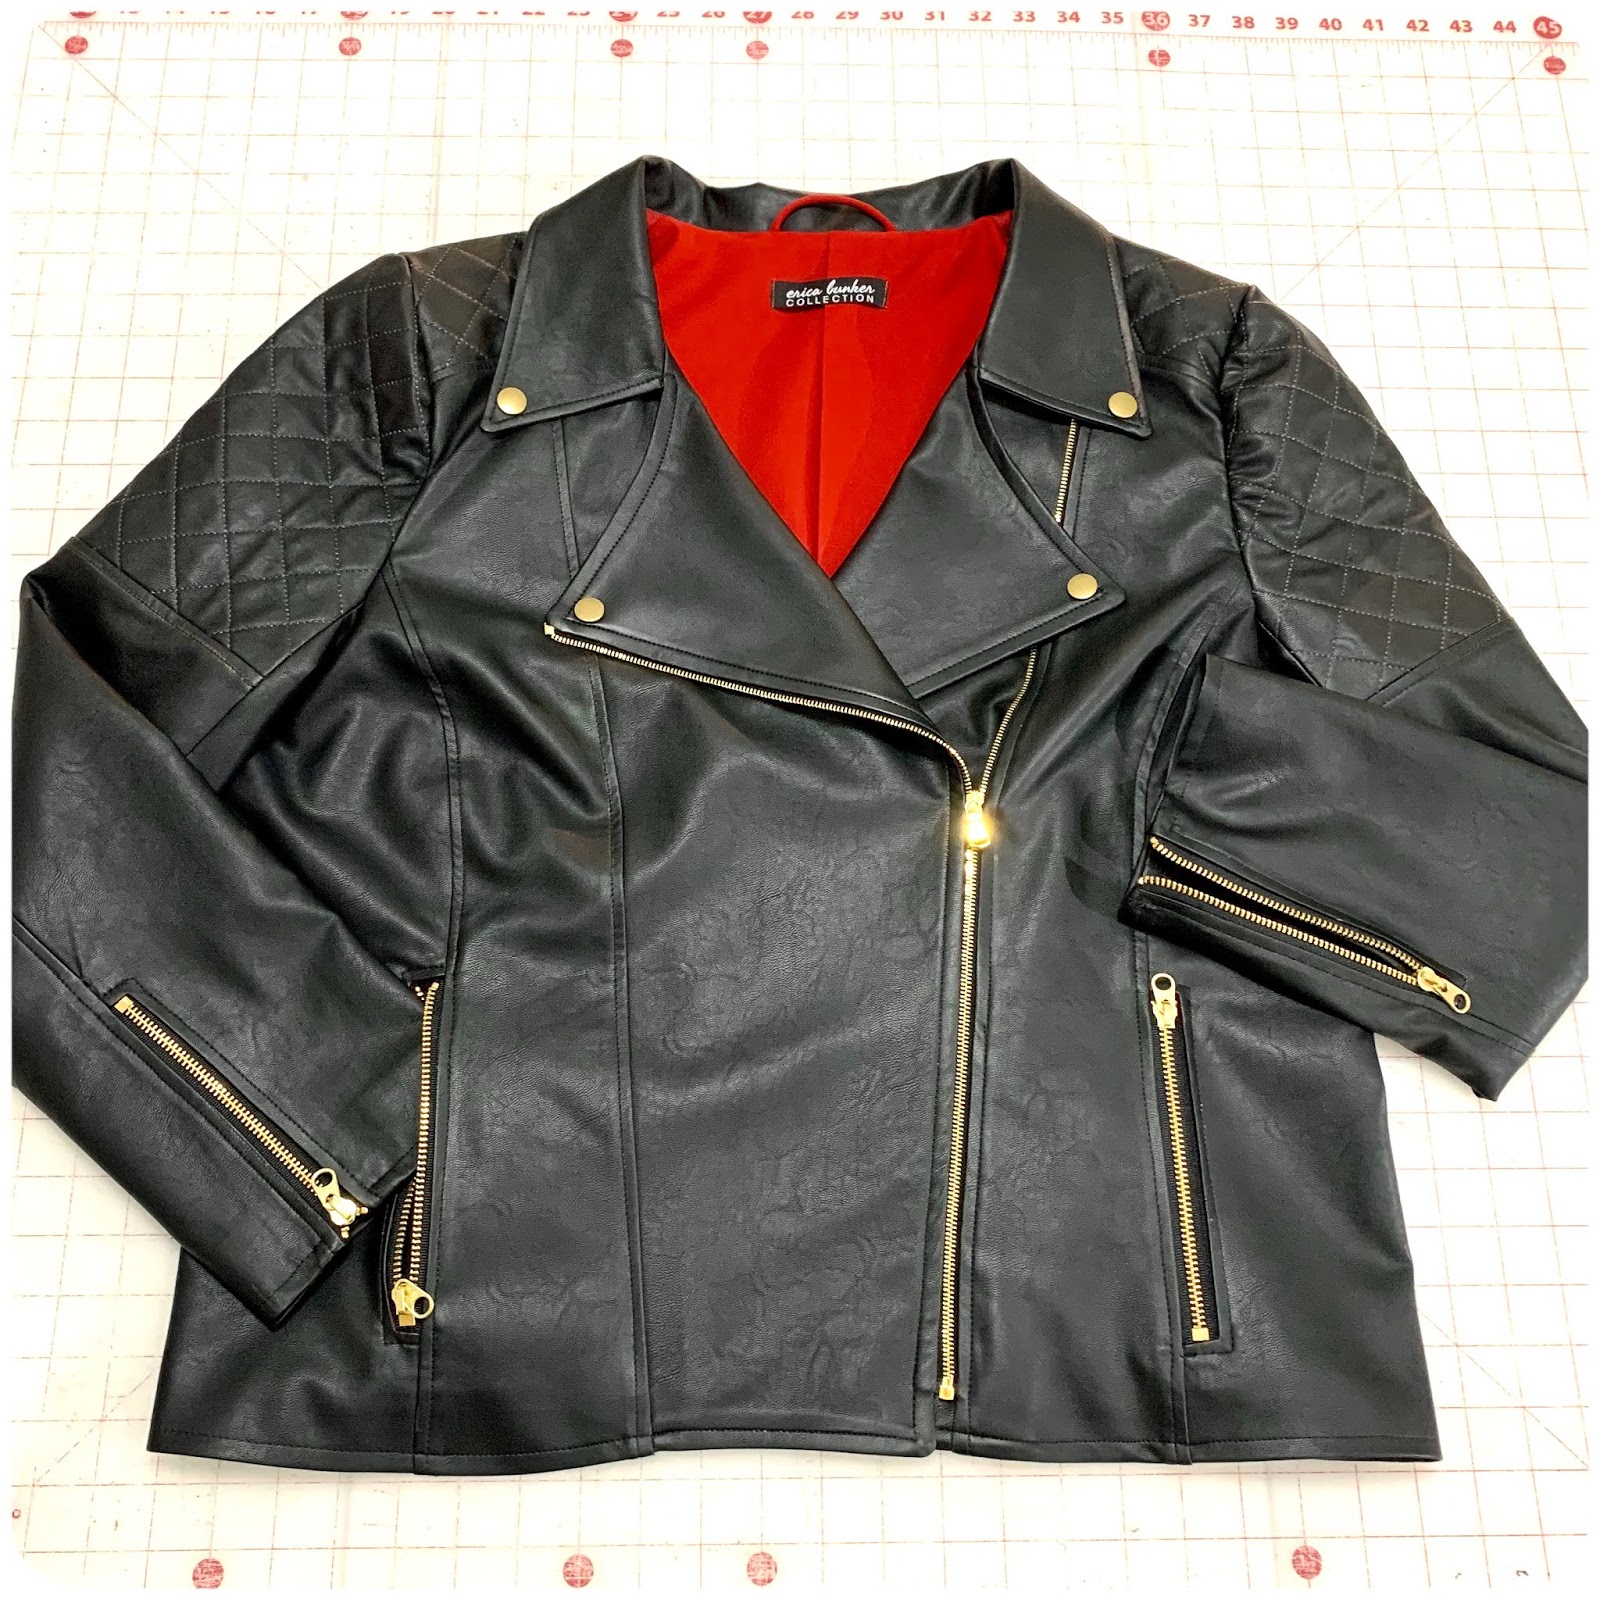 Learn to Sew a Moto Jacket -- A Step-by-Step Video Tutorial -- Erica Bunker DIY Style!